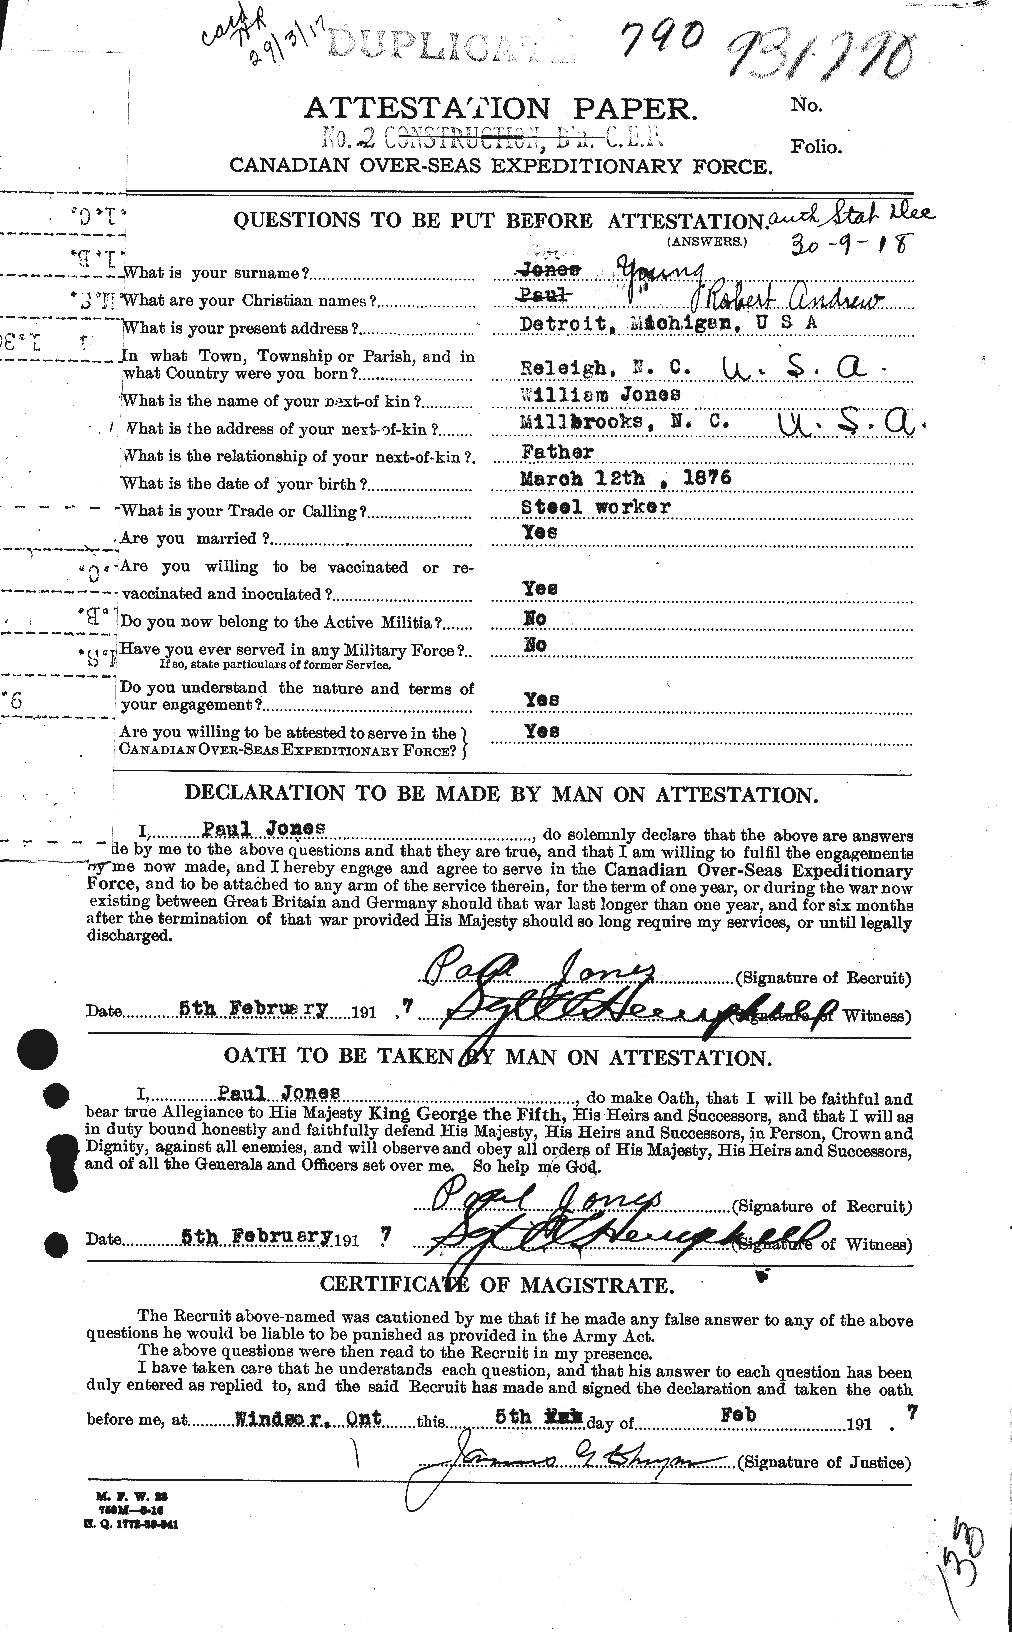 Personnel Records of the First World War - CEF 692166a